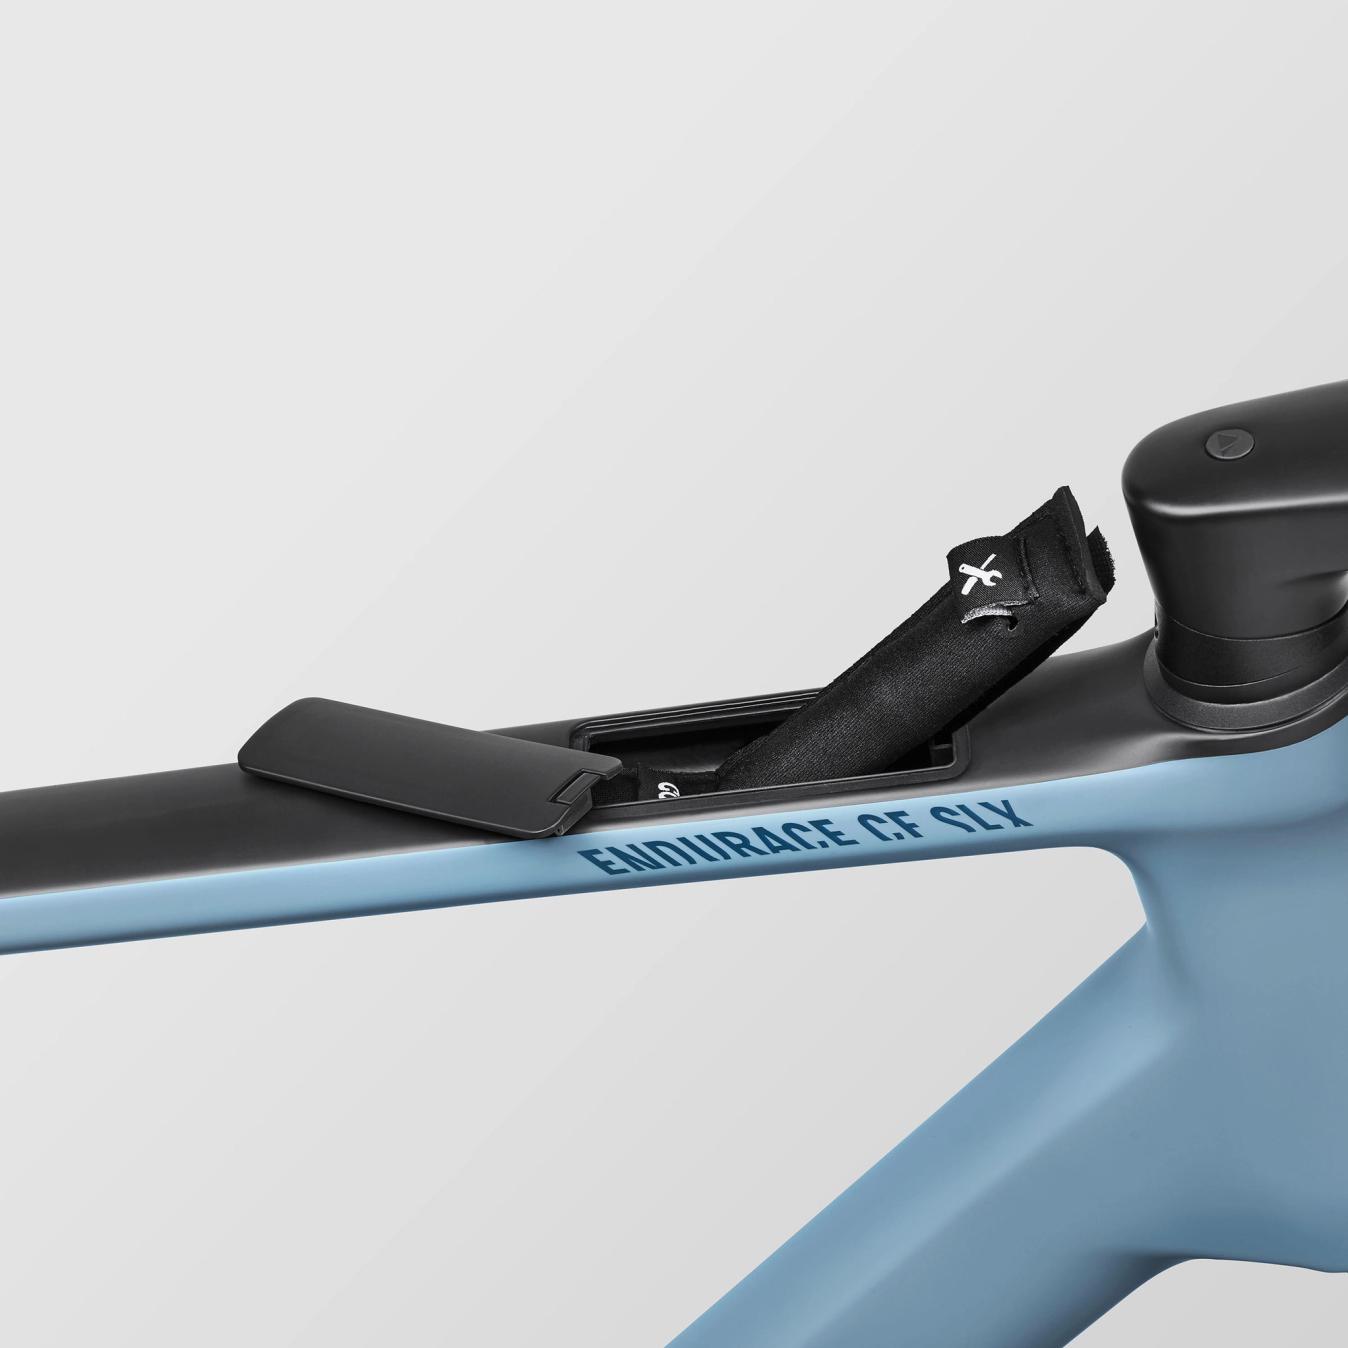 In-frame storage on the Endurace allows for repair tools to be held in the bike.